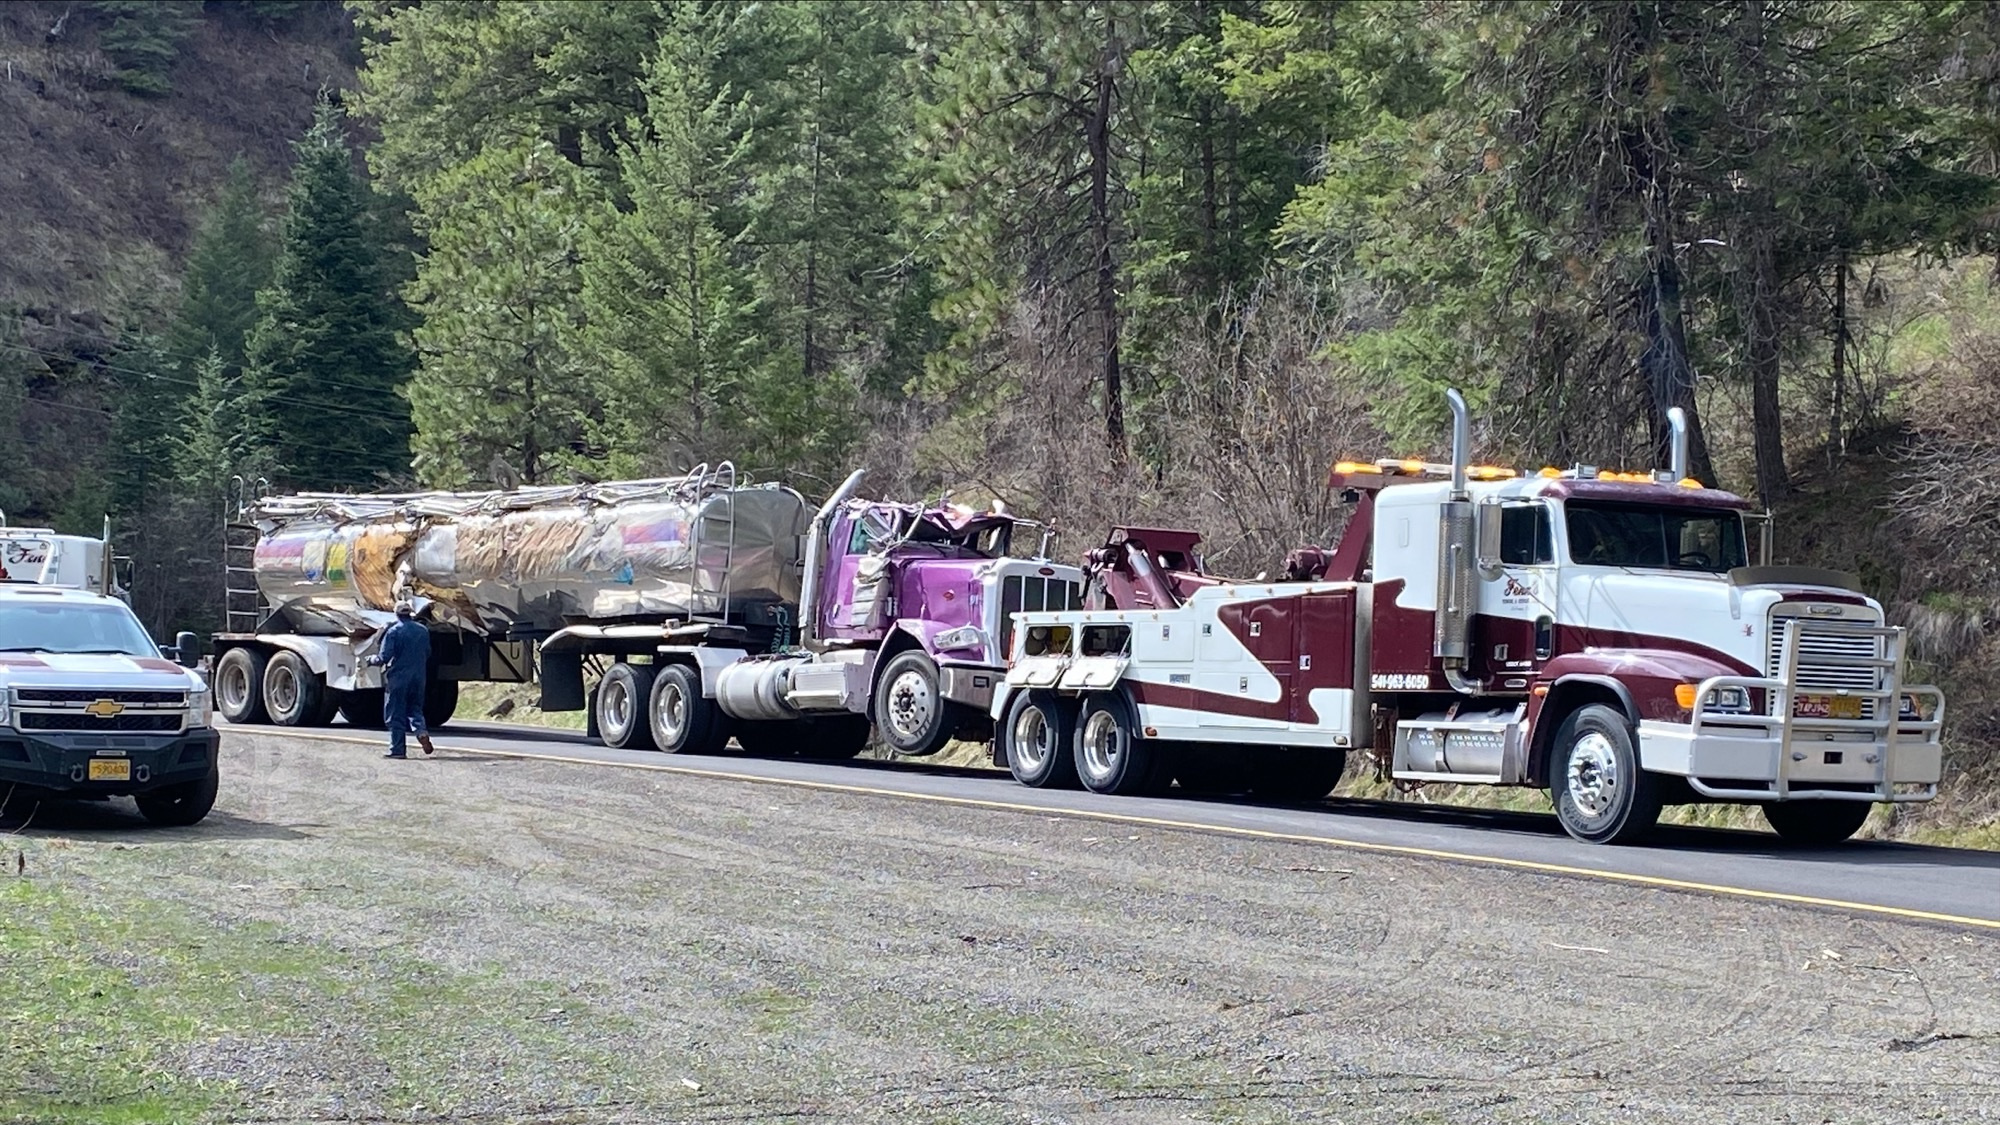 A wrecked tanker truck is towed from the crash scene.